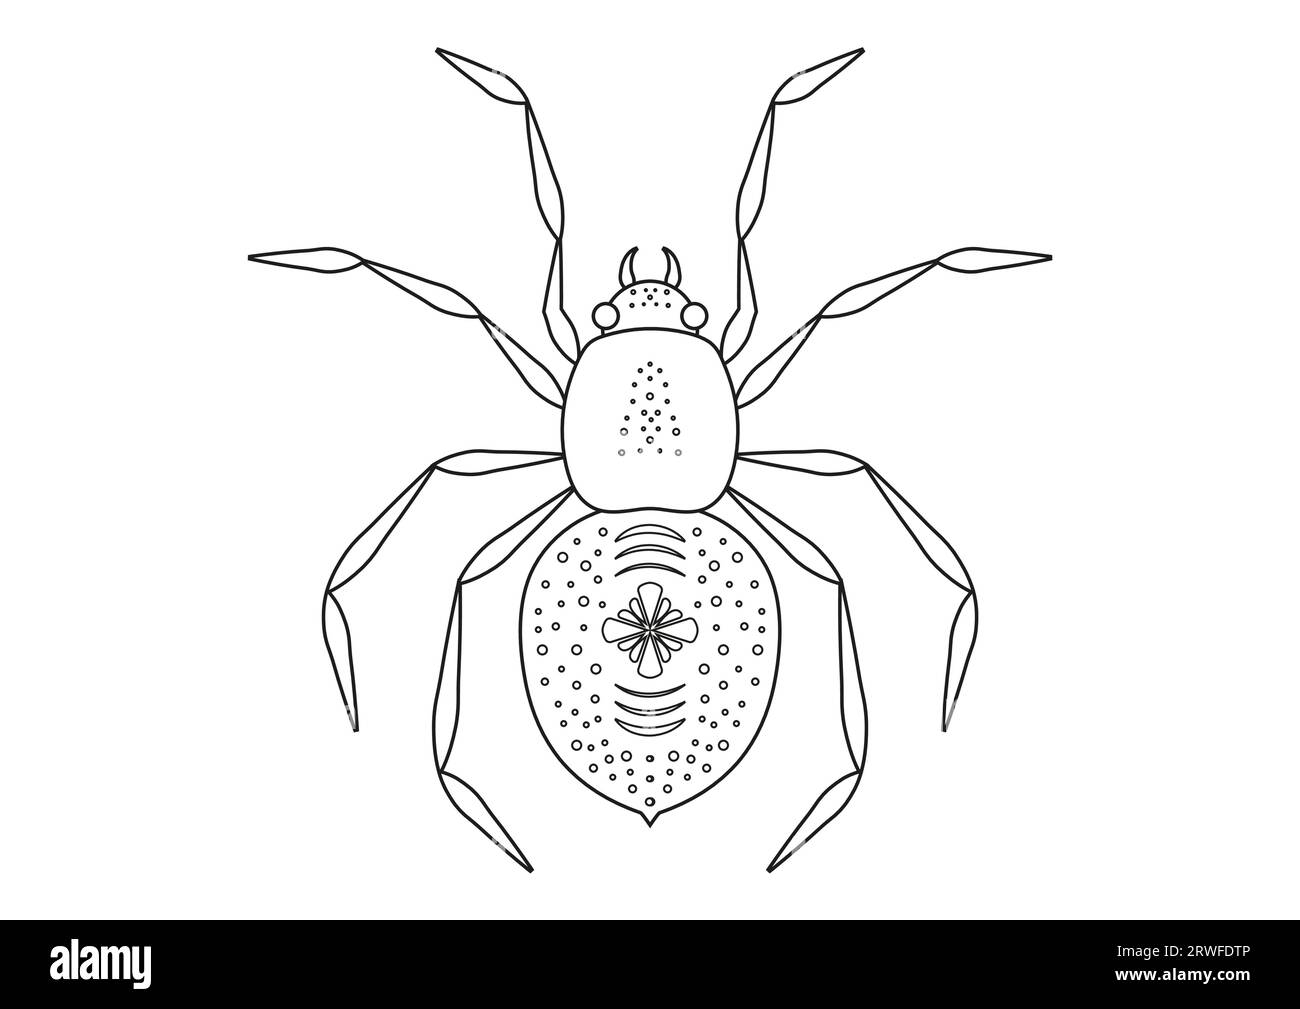 Black and White Spider Clipart Vector isolated on White Background. Coloring Page of a Spider Stock Vector